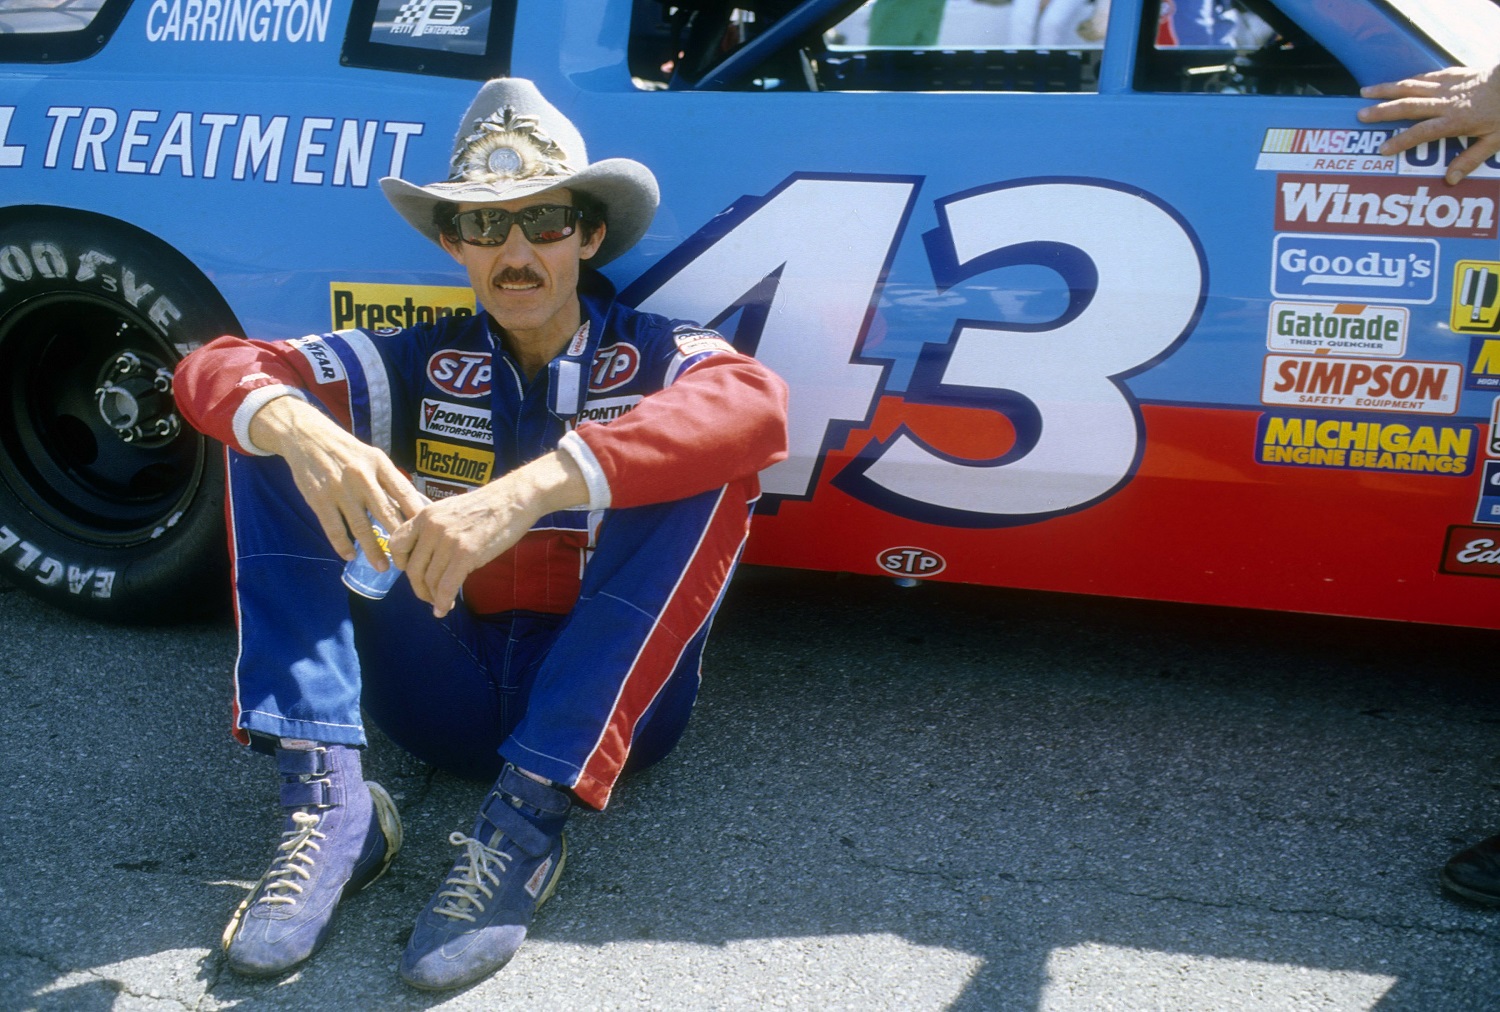 Lee Petty Taught Future Racing Legend Richard Petty a Hard Lesson in His  NASCAR Cup Series Debut